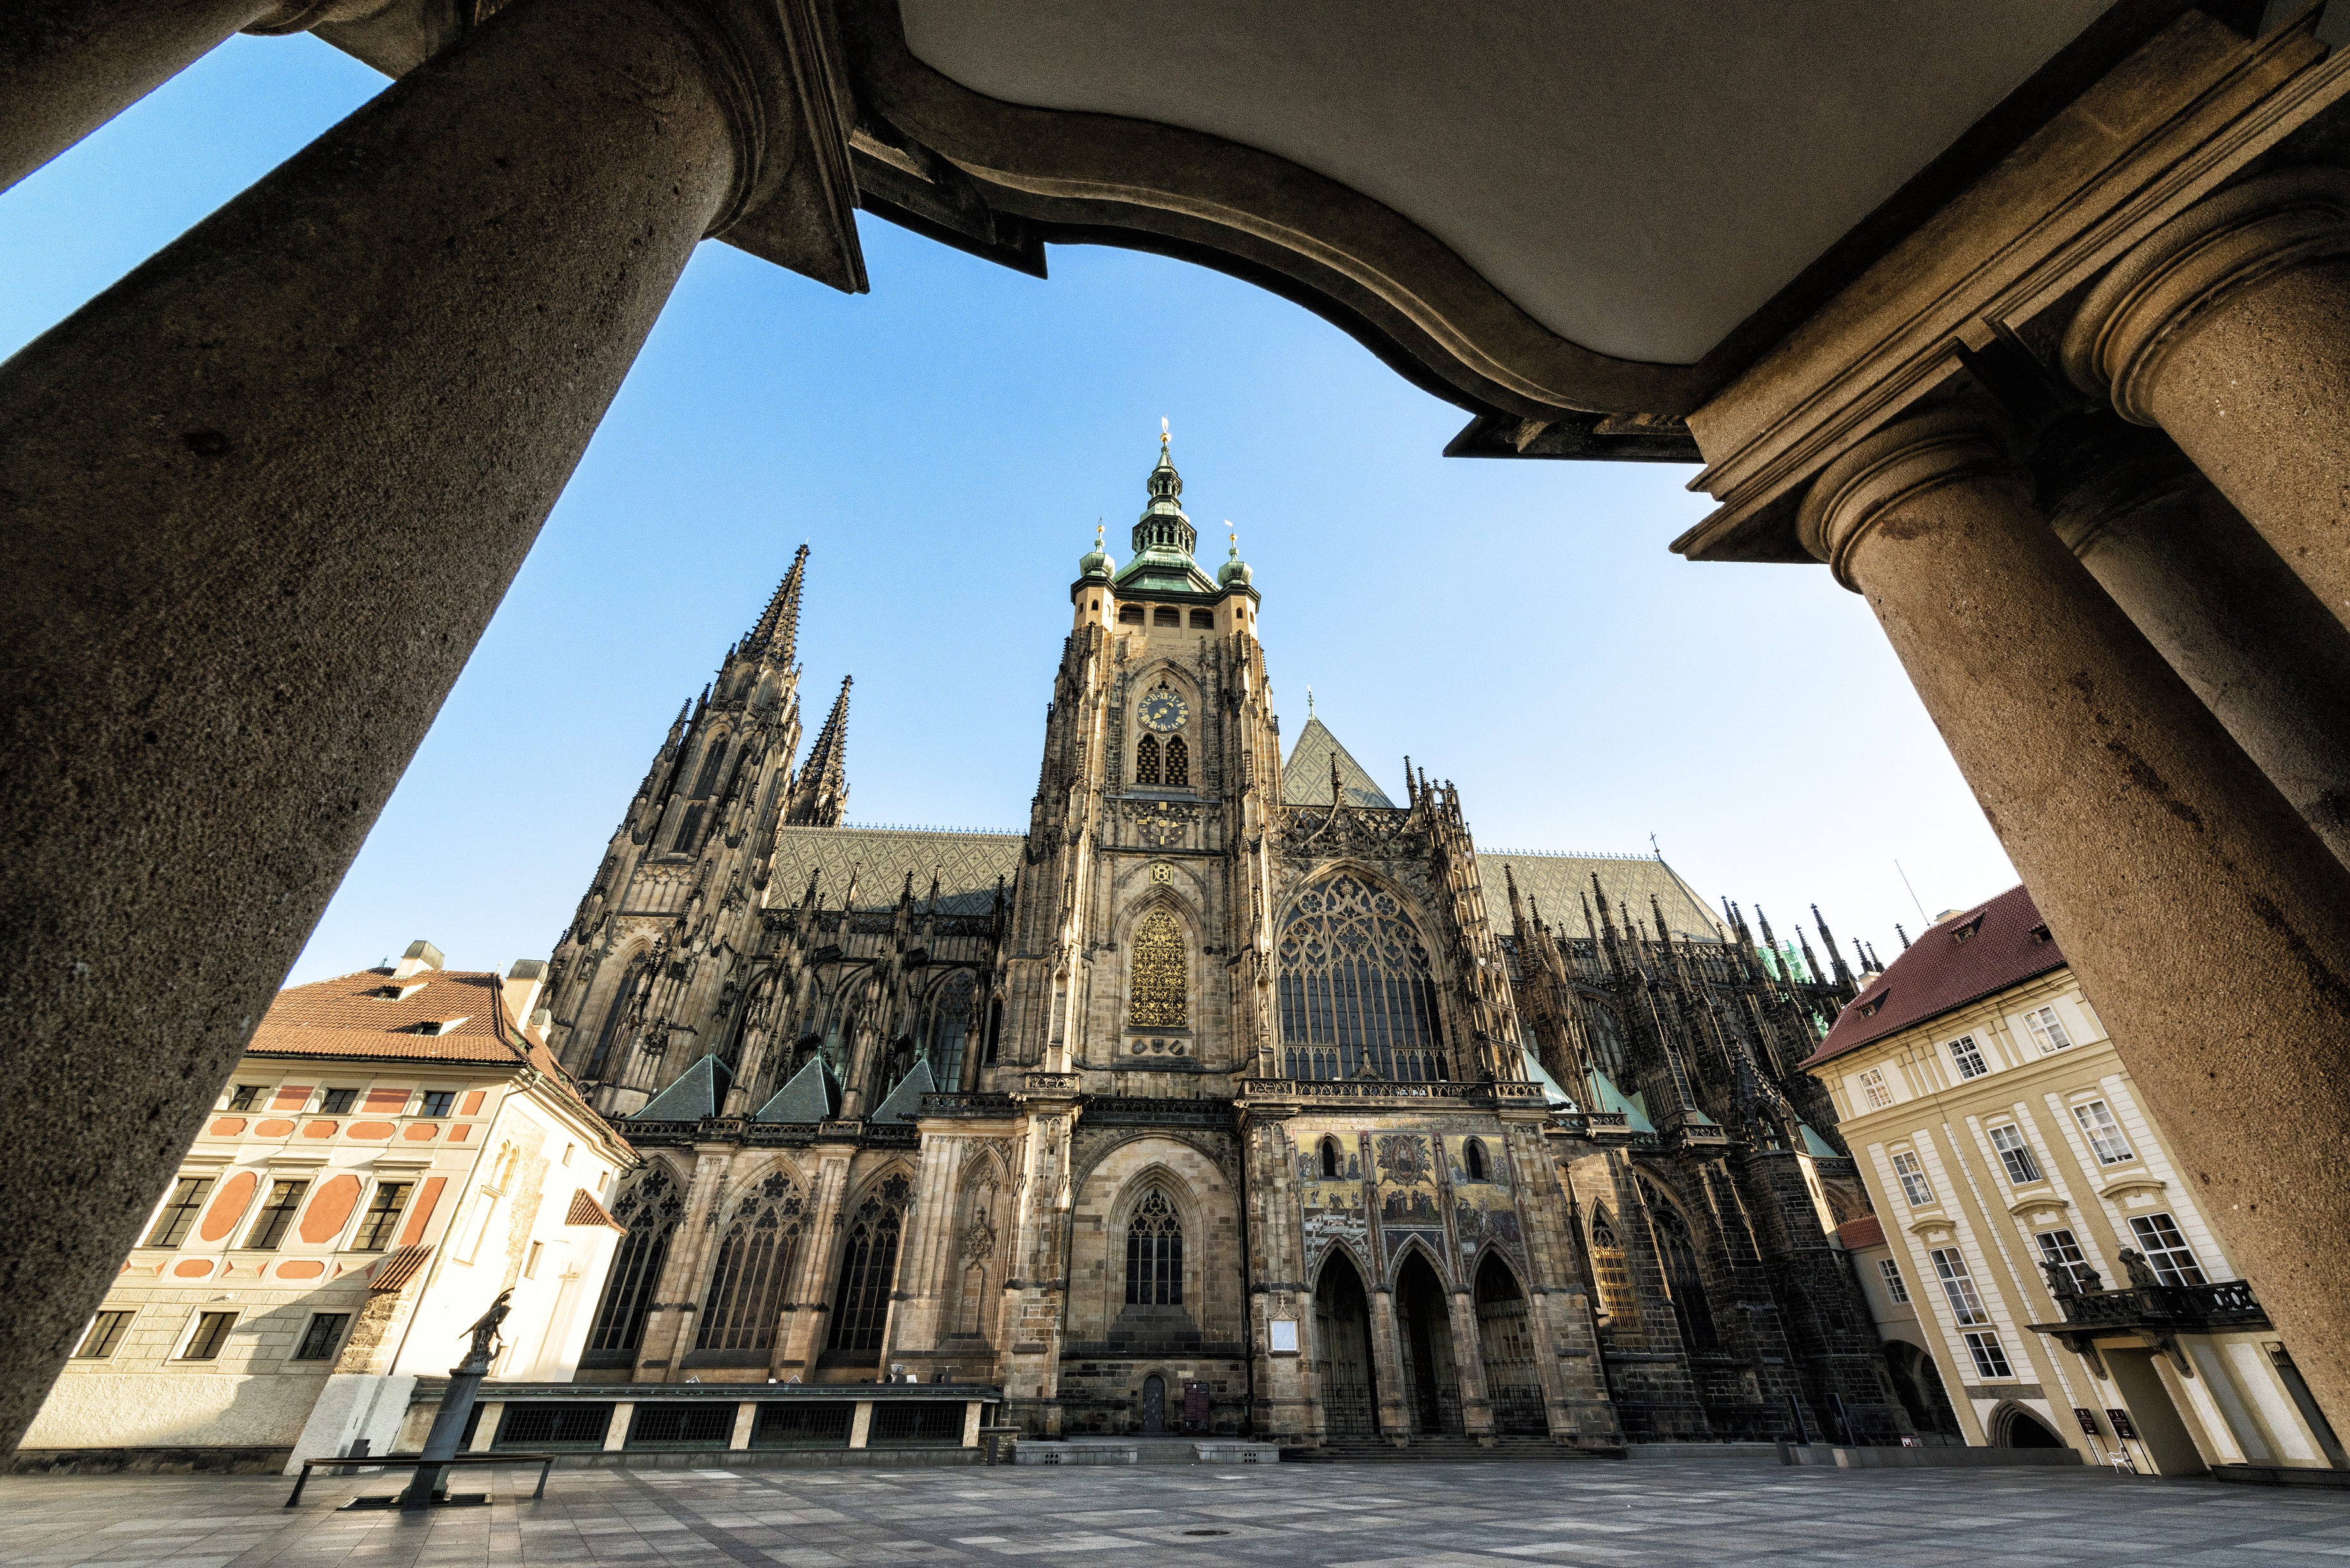 Images of St. Vitus Cathedral | 3680x2456